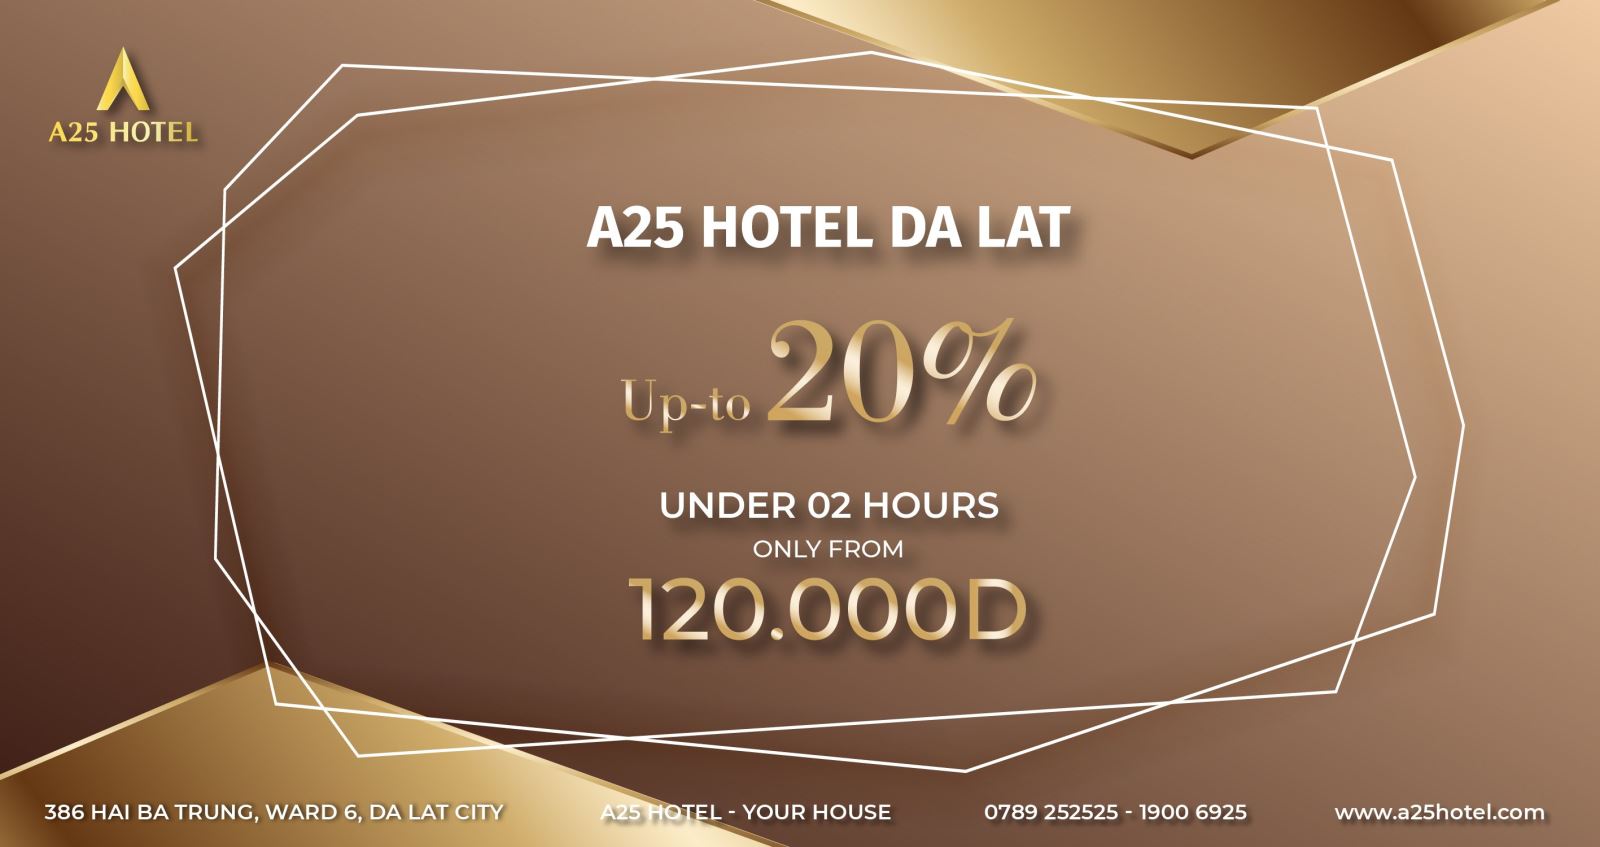 a25-hotel-da-lat-perfect-place-for-you-vacation